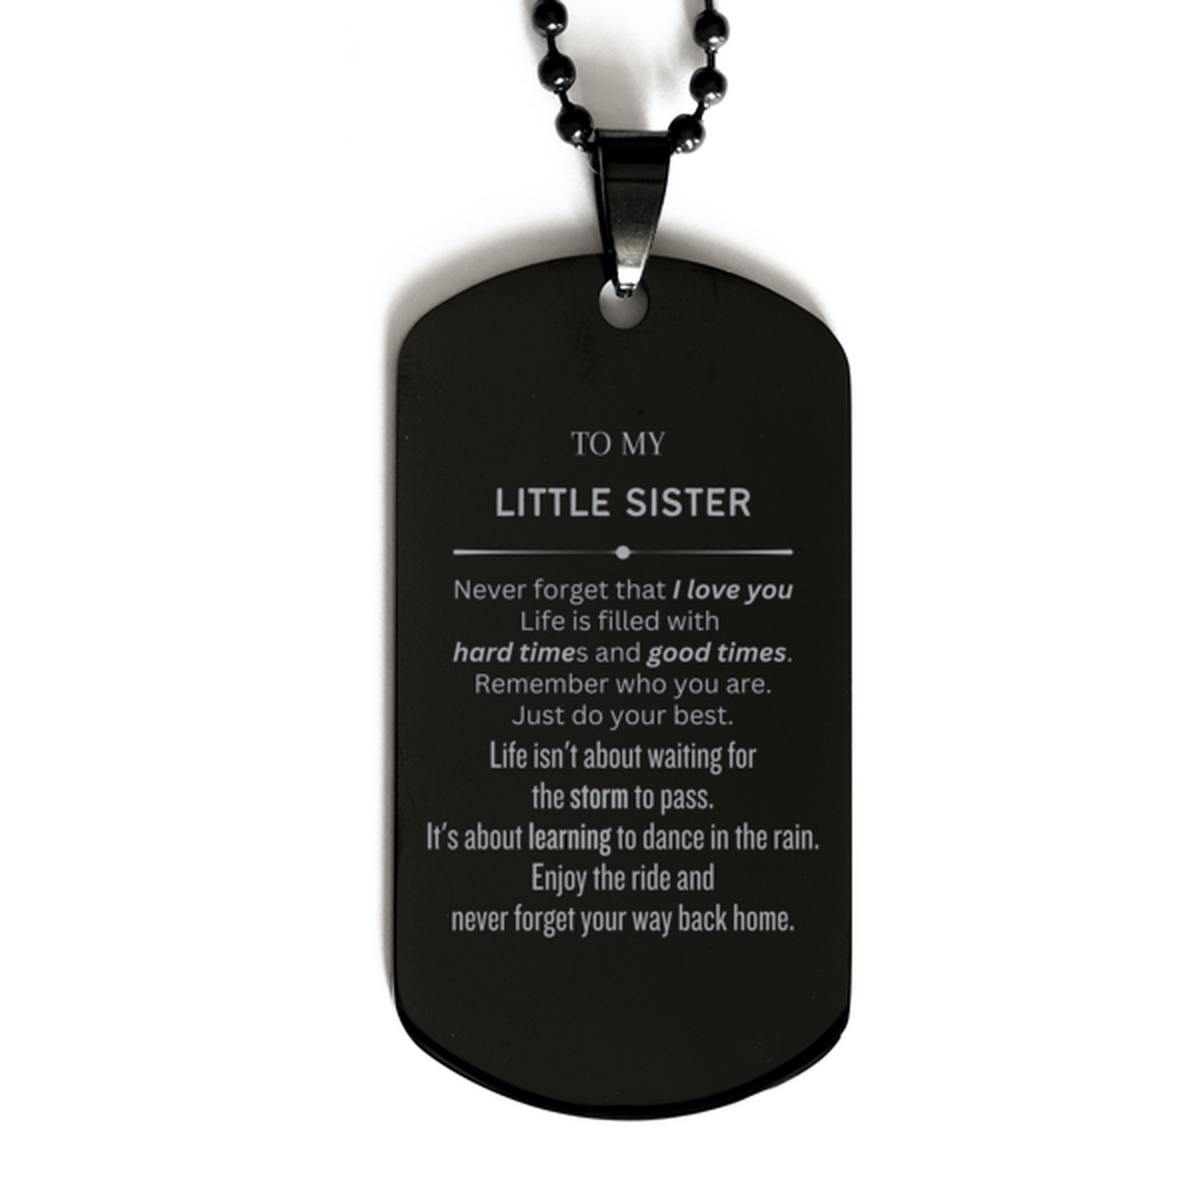 Christmas Little Sister Black Dog Tag Gifts, To My Little Sister Birthday Thank You Gifts For Little Sister, Graduation Unique Gifts For Little Sister To My Little Sister Never forget that I love you life is filled with hard times and good times. Remember